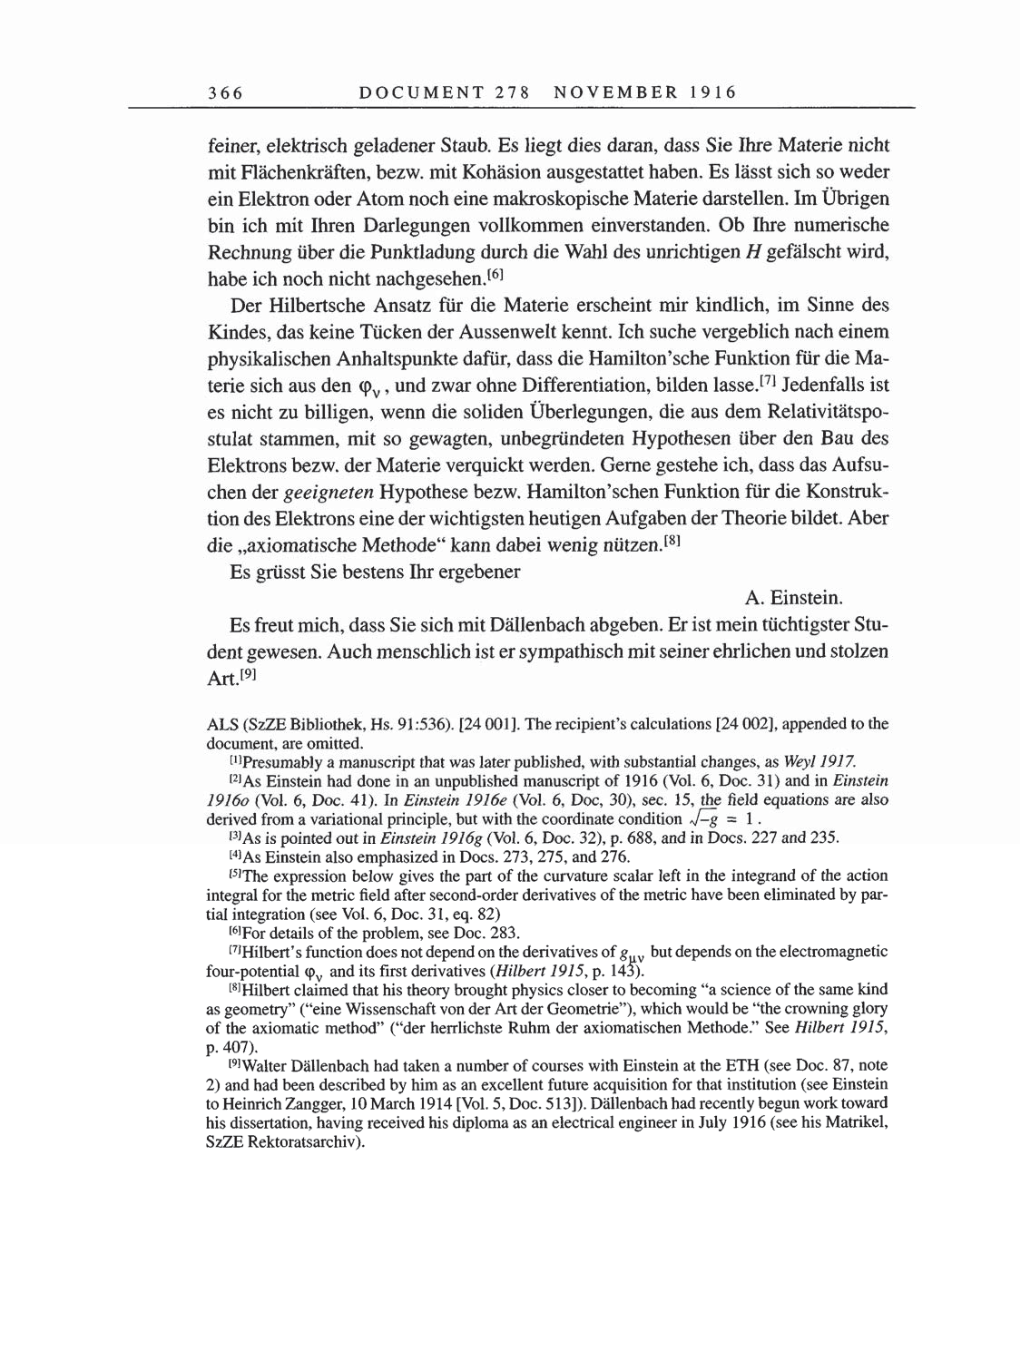 Volume 8, Part A: The Berlin Years: Correspondence 1914-1917 page 366